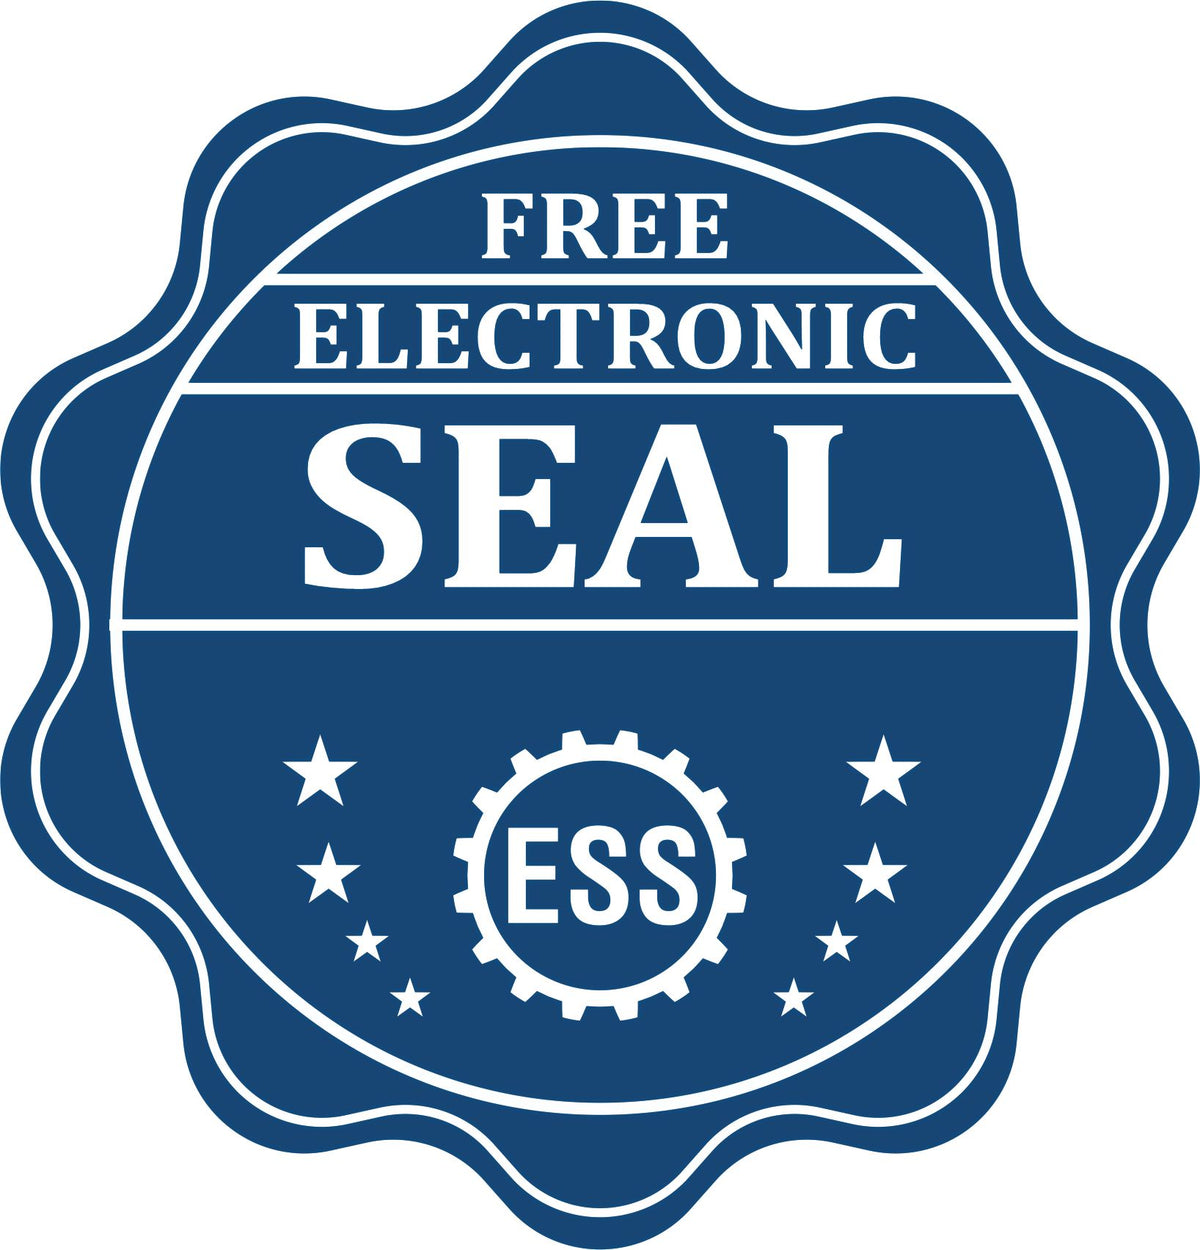 A badge showing a free electronic seal for the Hybrid South Carolina Geologist Seal with stars and the ESS gear on the emblem.